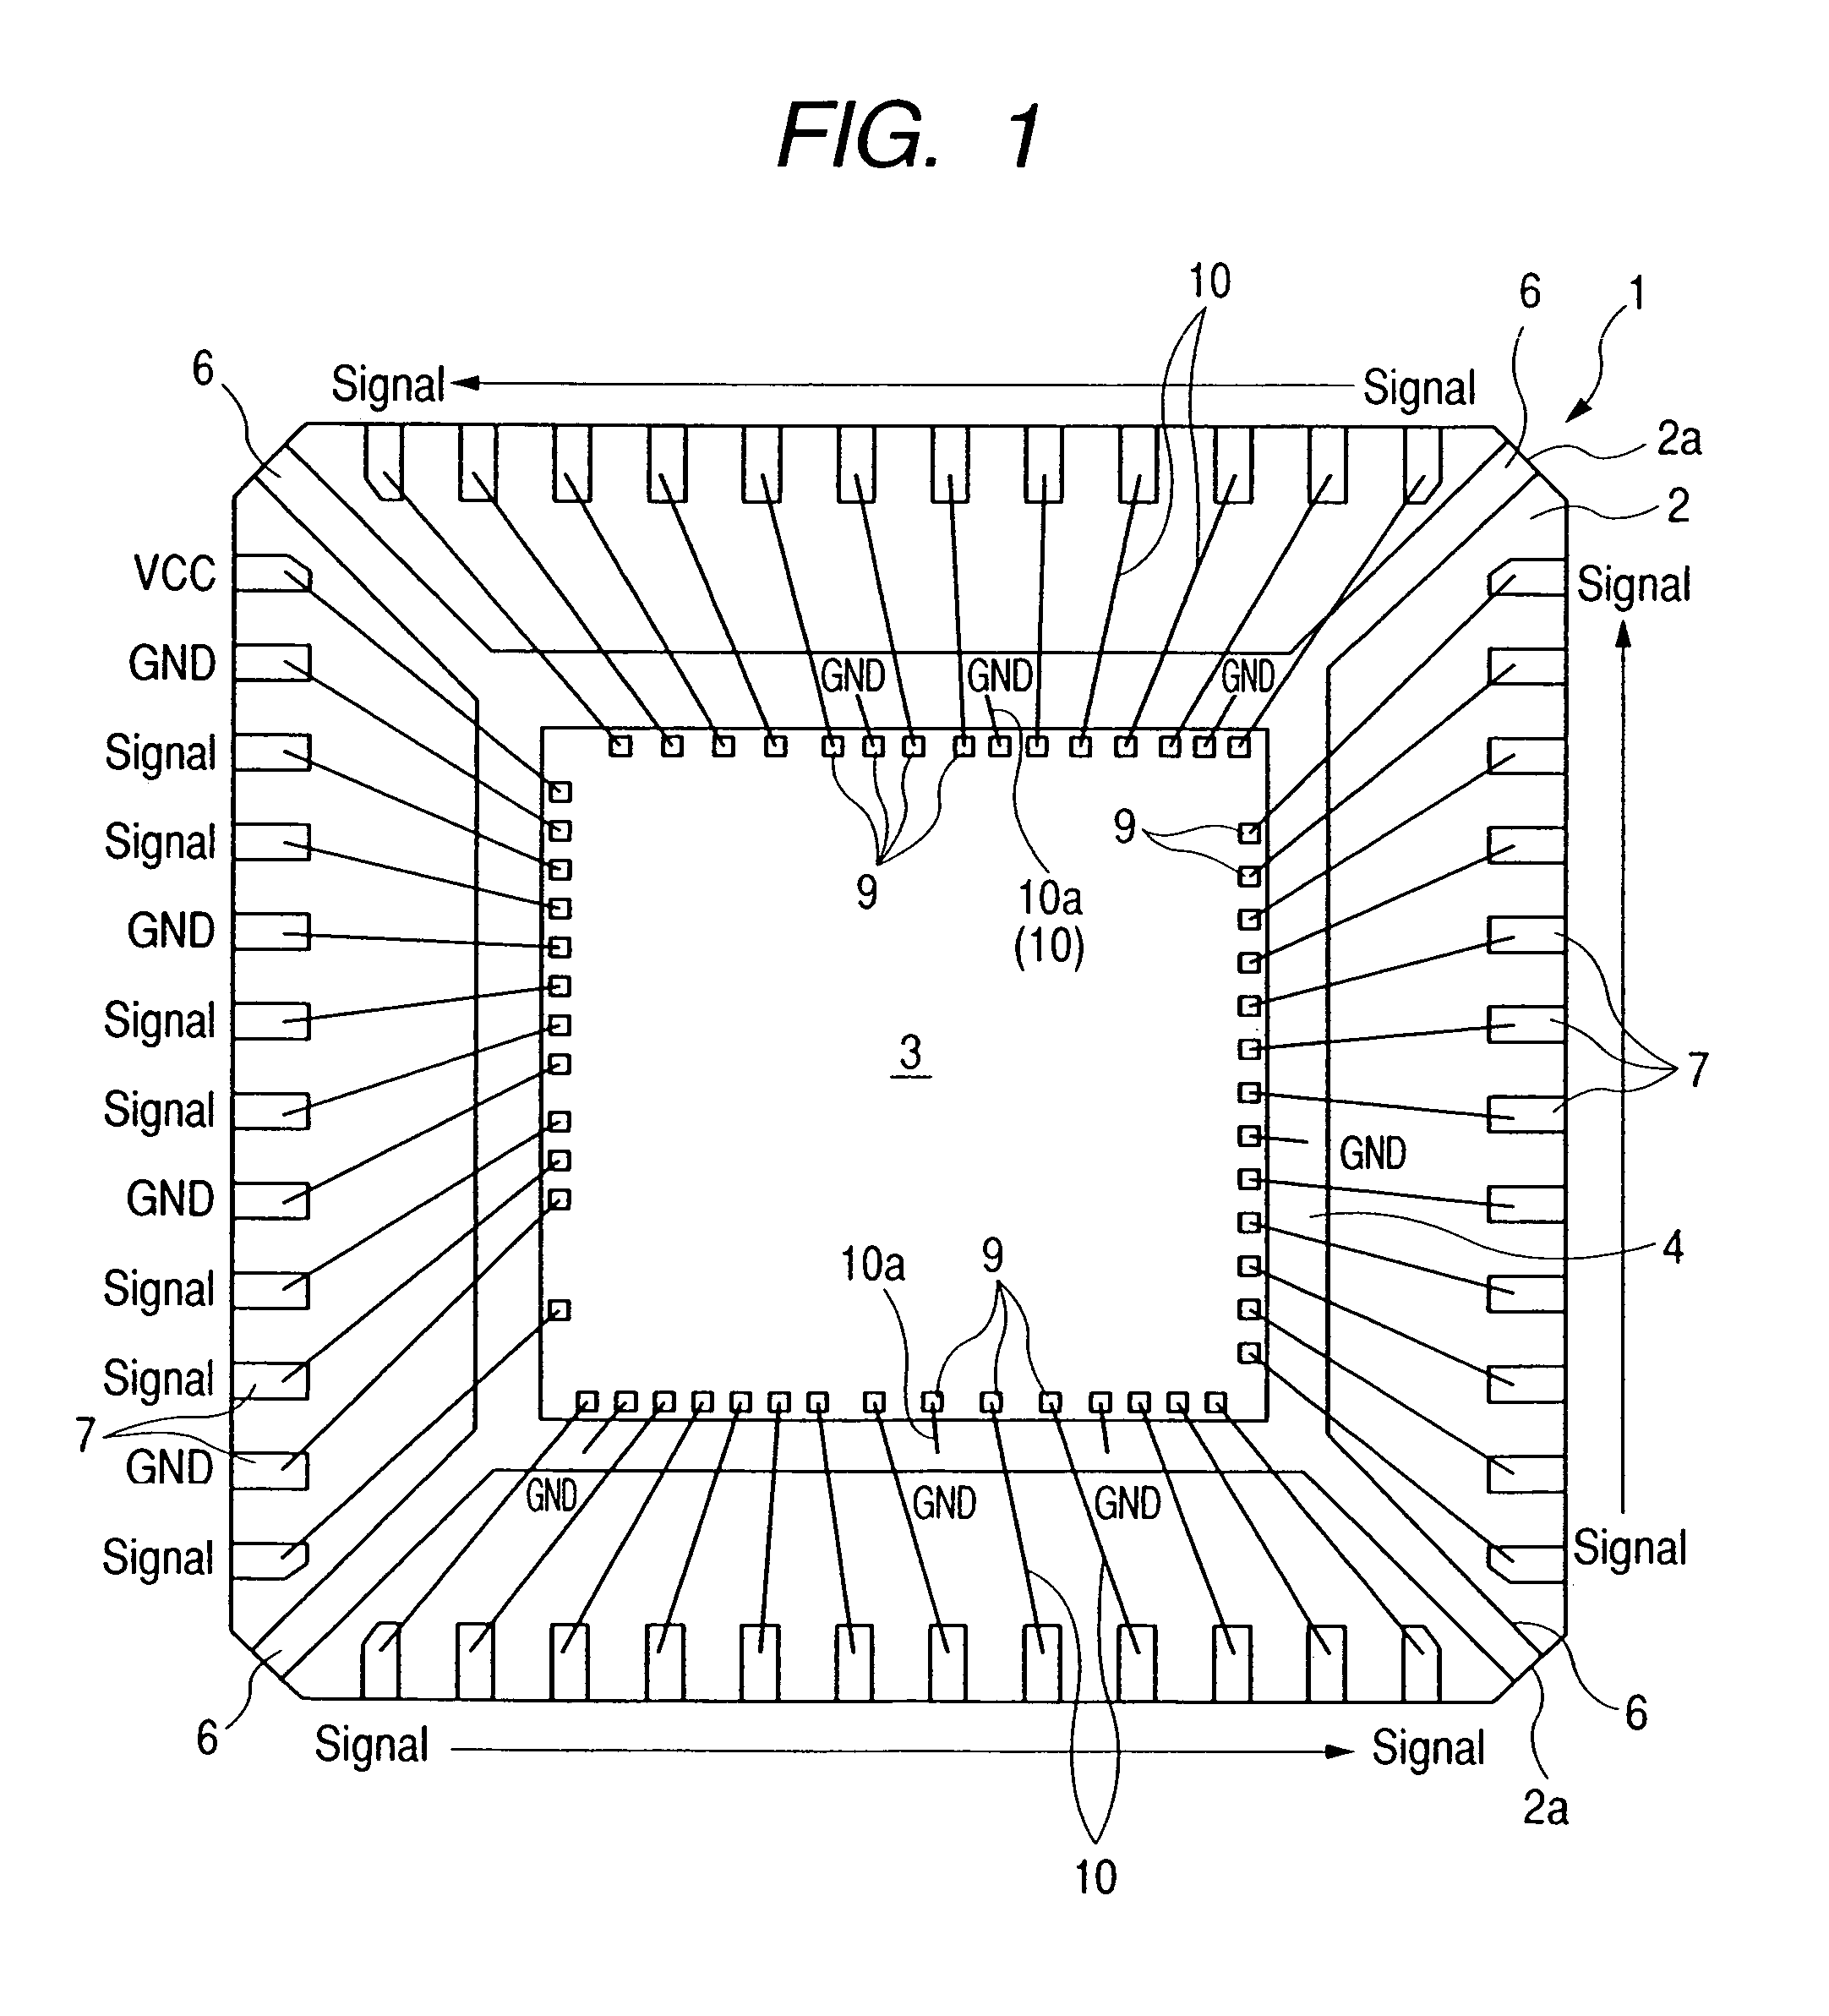 Semiconductor device with electrically isolated ground structures